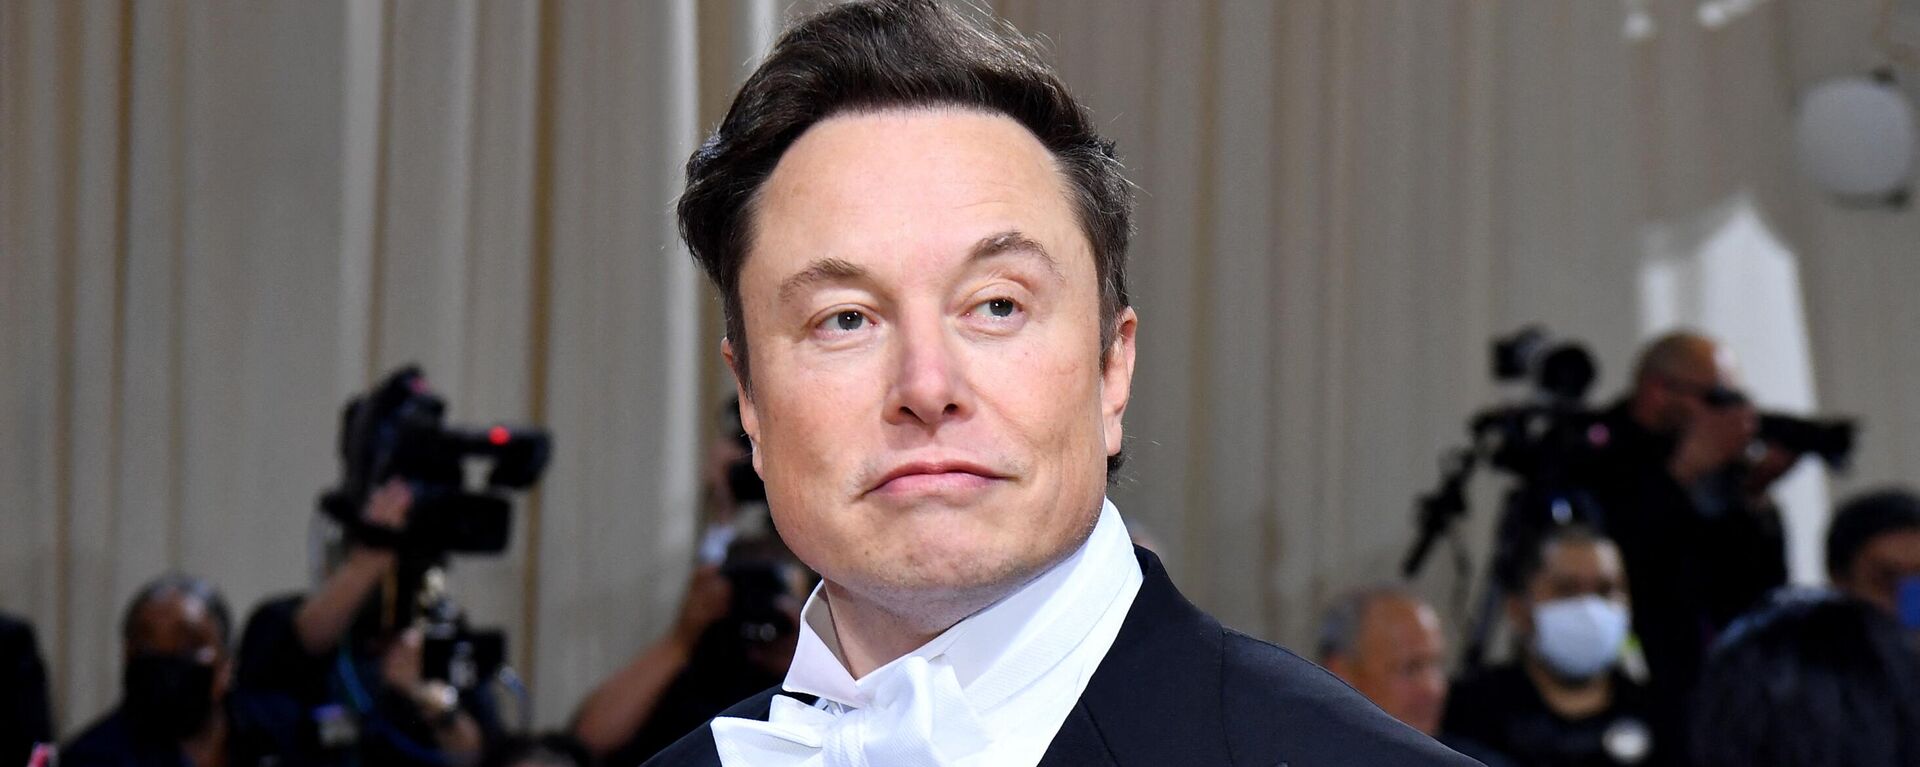 CEO, and chief engineer at SpaceX, Elon Musk, arrives for the 2022 Met Gala at the Metropolitan Museum of Art on May 2, 2022, in New York. - Sputnik International, 1920, 19.12.2022